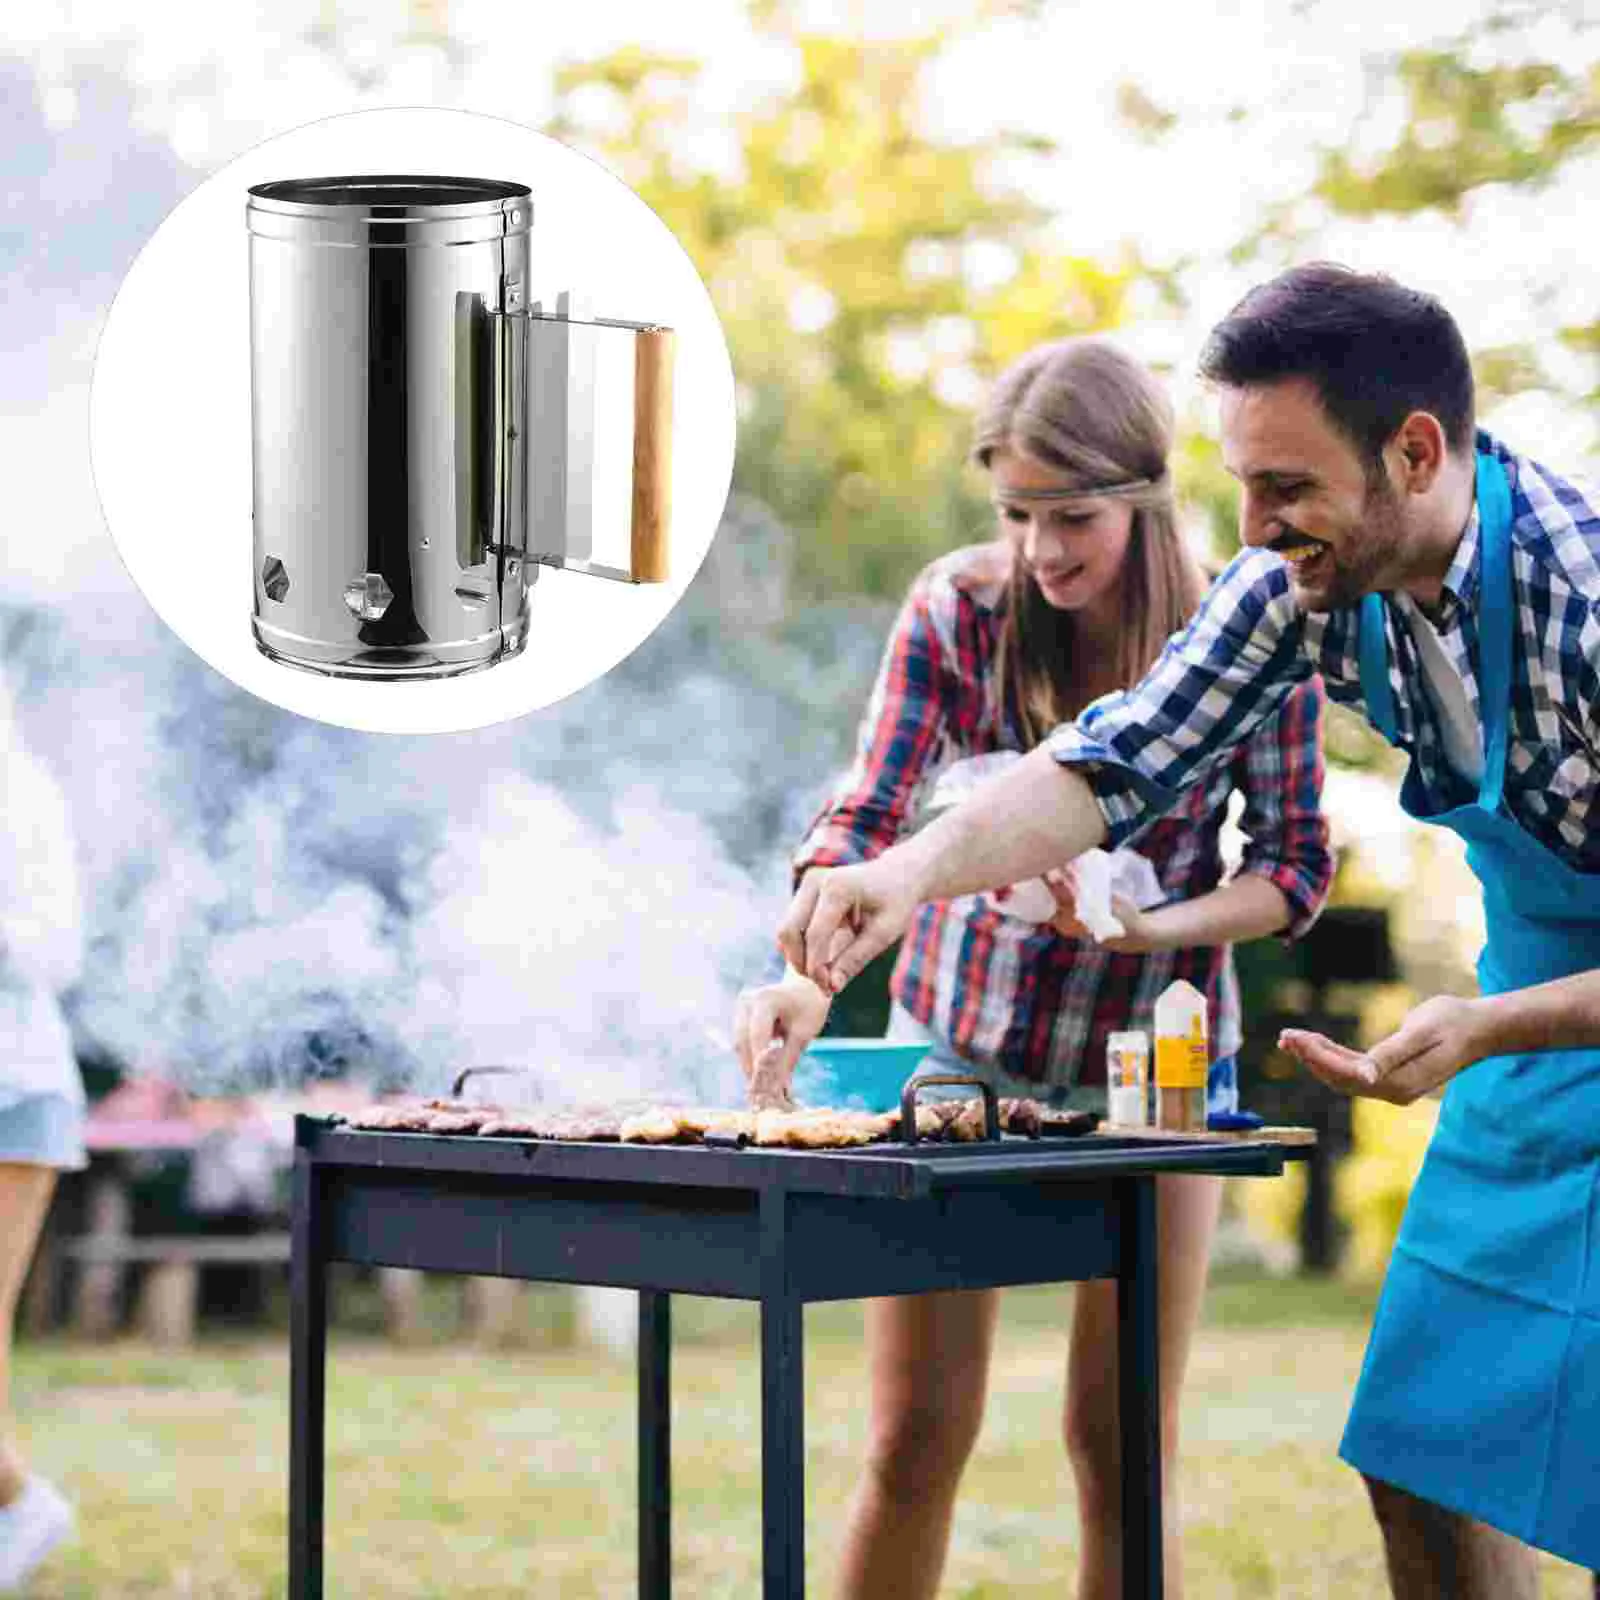 

Barbecue Tool Supplies Camping Bbq Fire Lighter Bbq Briquette Canister Rapidfire Charcoal Starter Chimney Lighter Basket